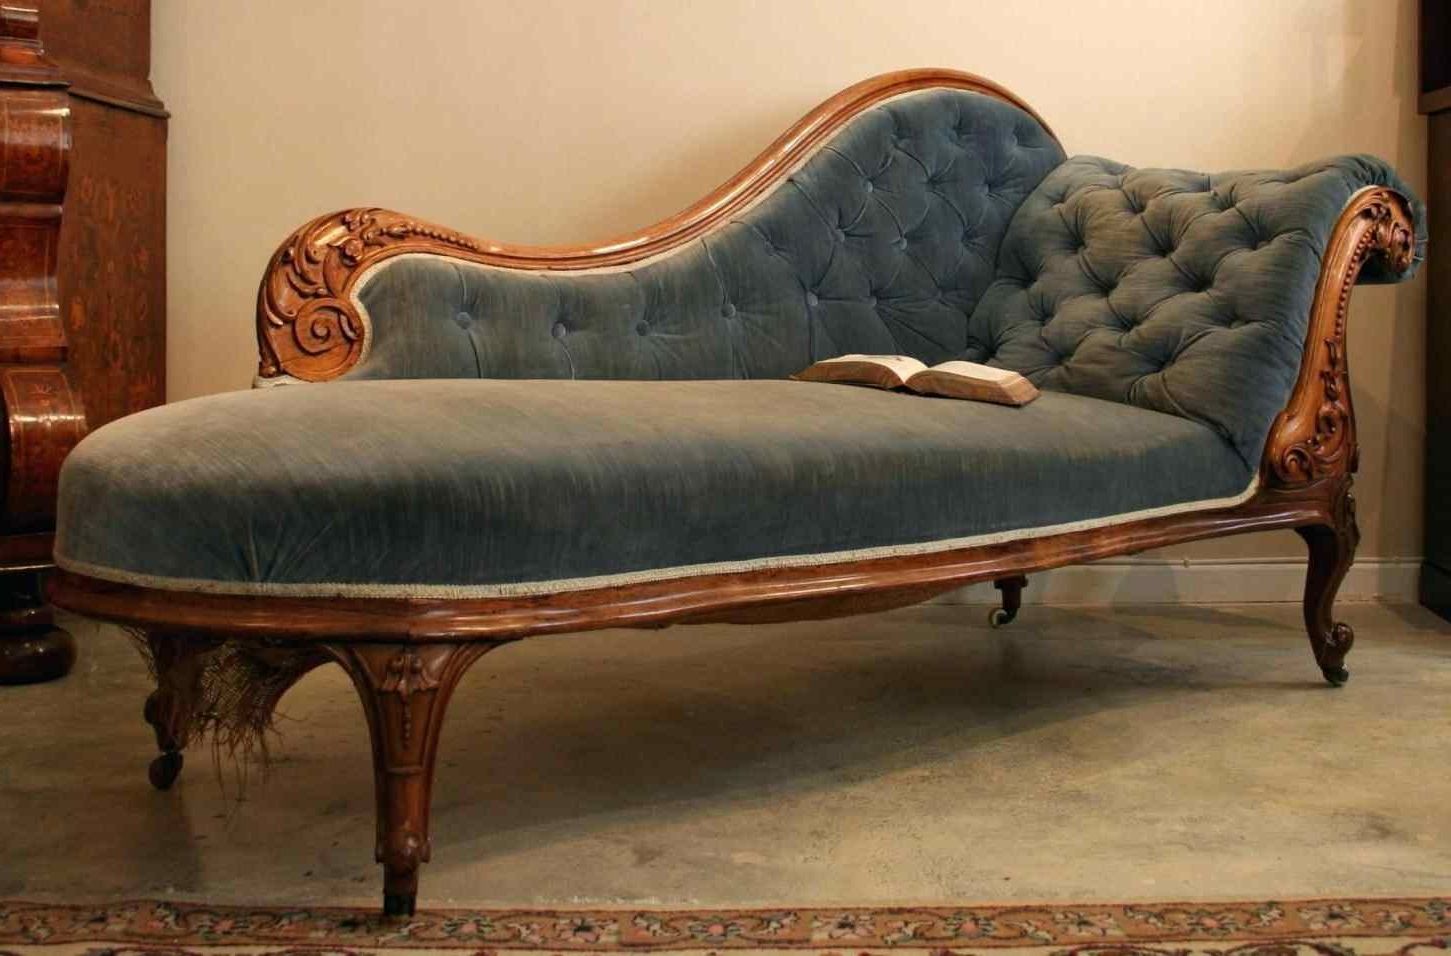 Sofa : Chairs For Living Room Furniture Magnificent Leather Within Well Known Vintage Chaise Lounges (View 9 of 15)